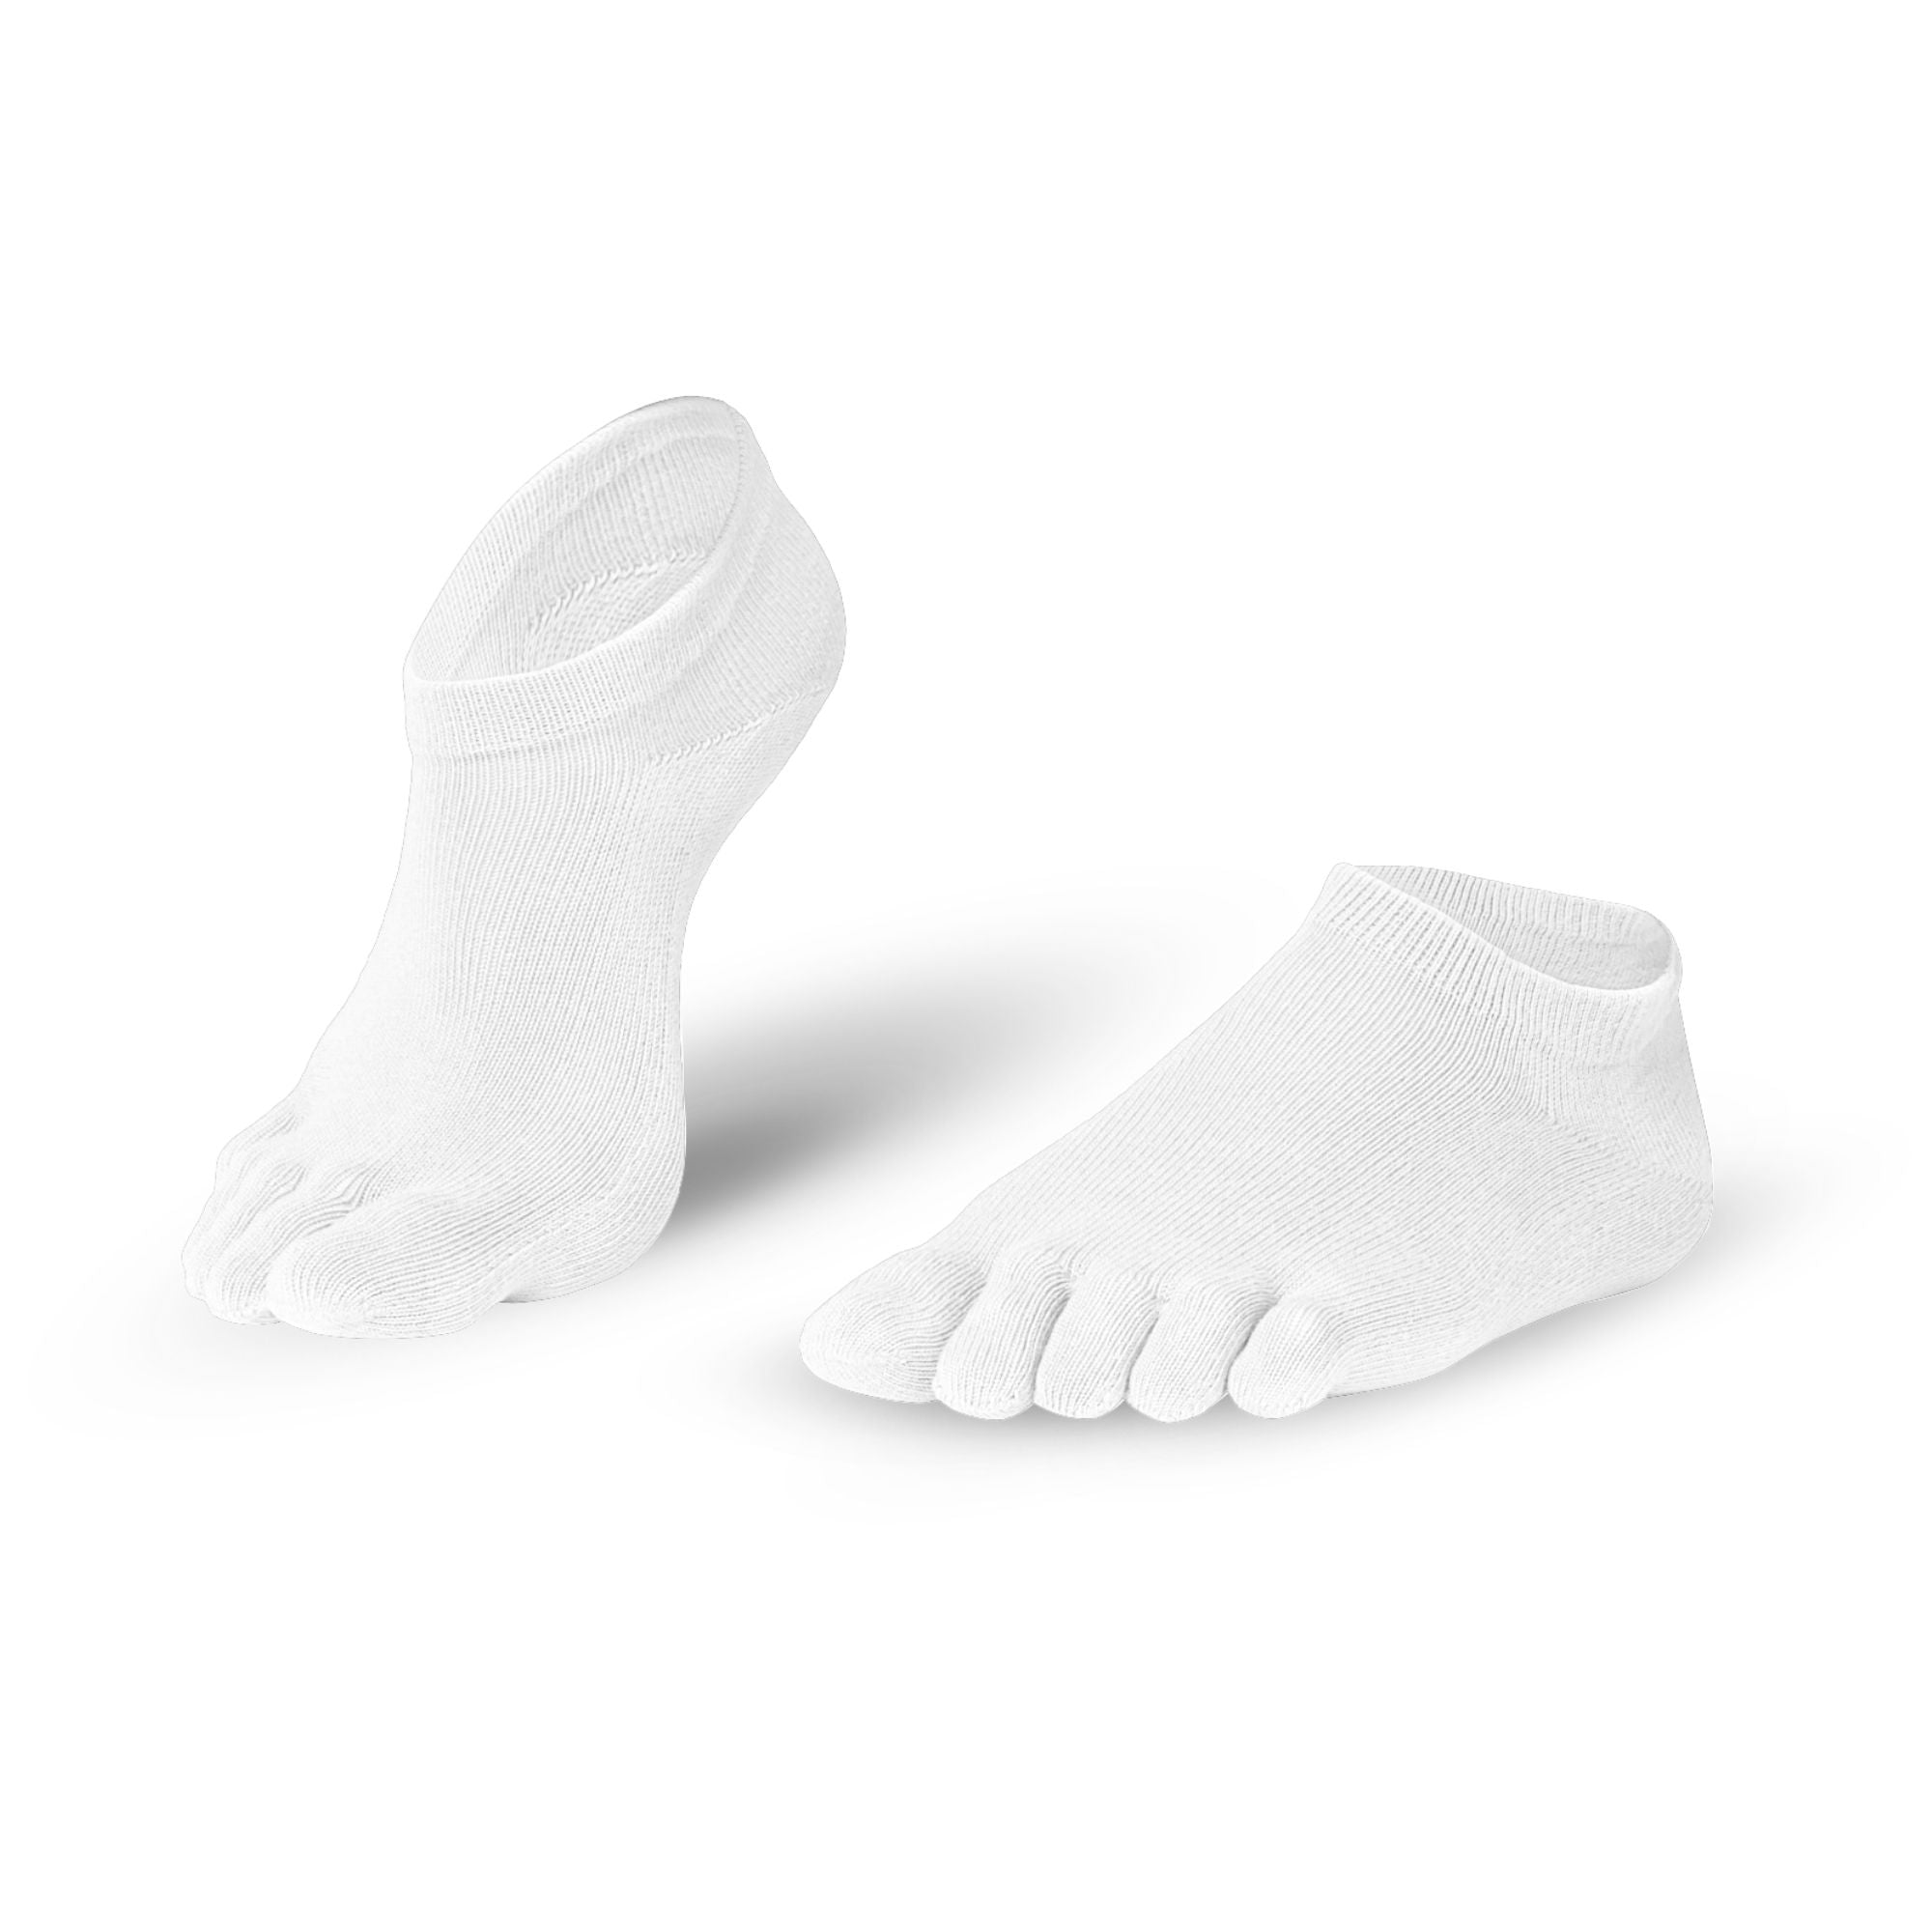 Knitido Everyday Essentials Sneaker toe socks from cotton for everyday life in many colors